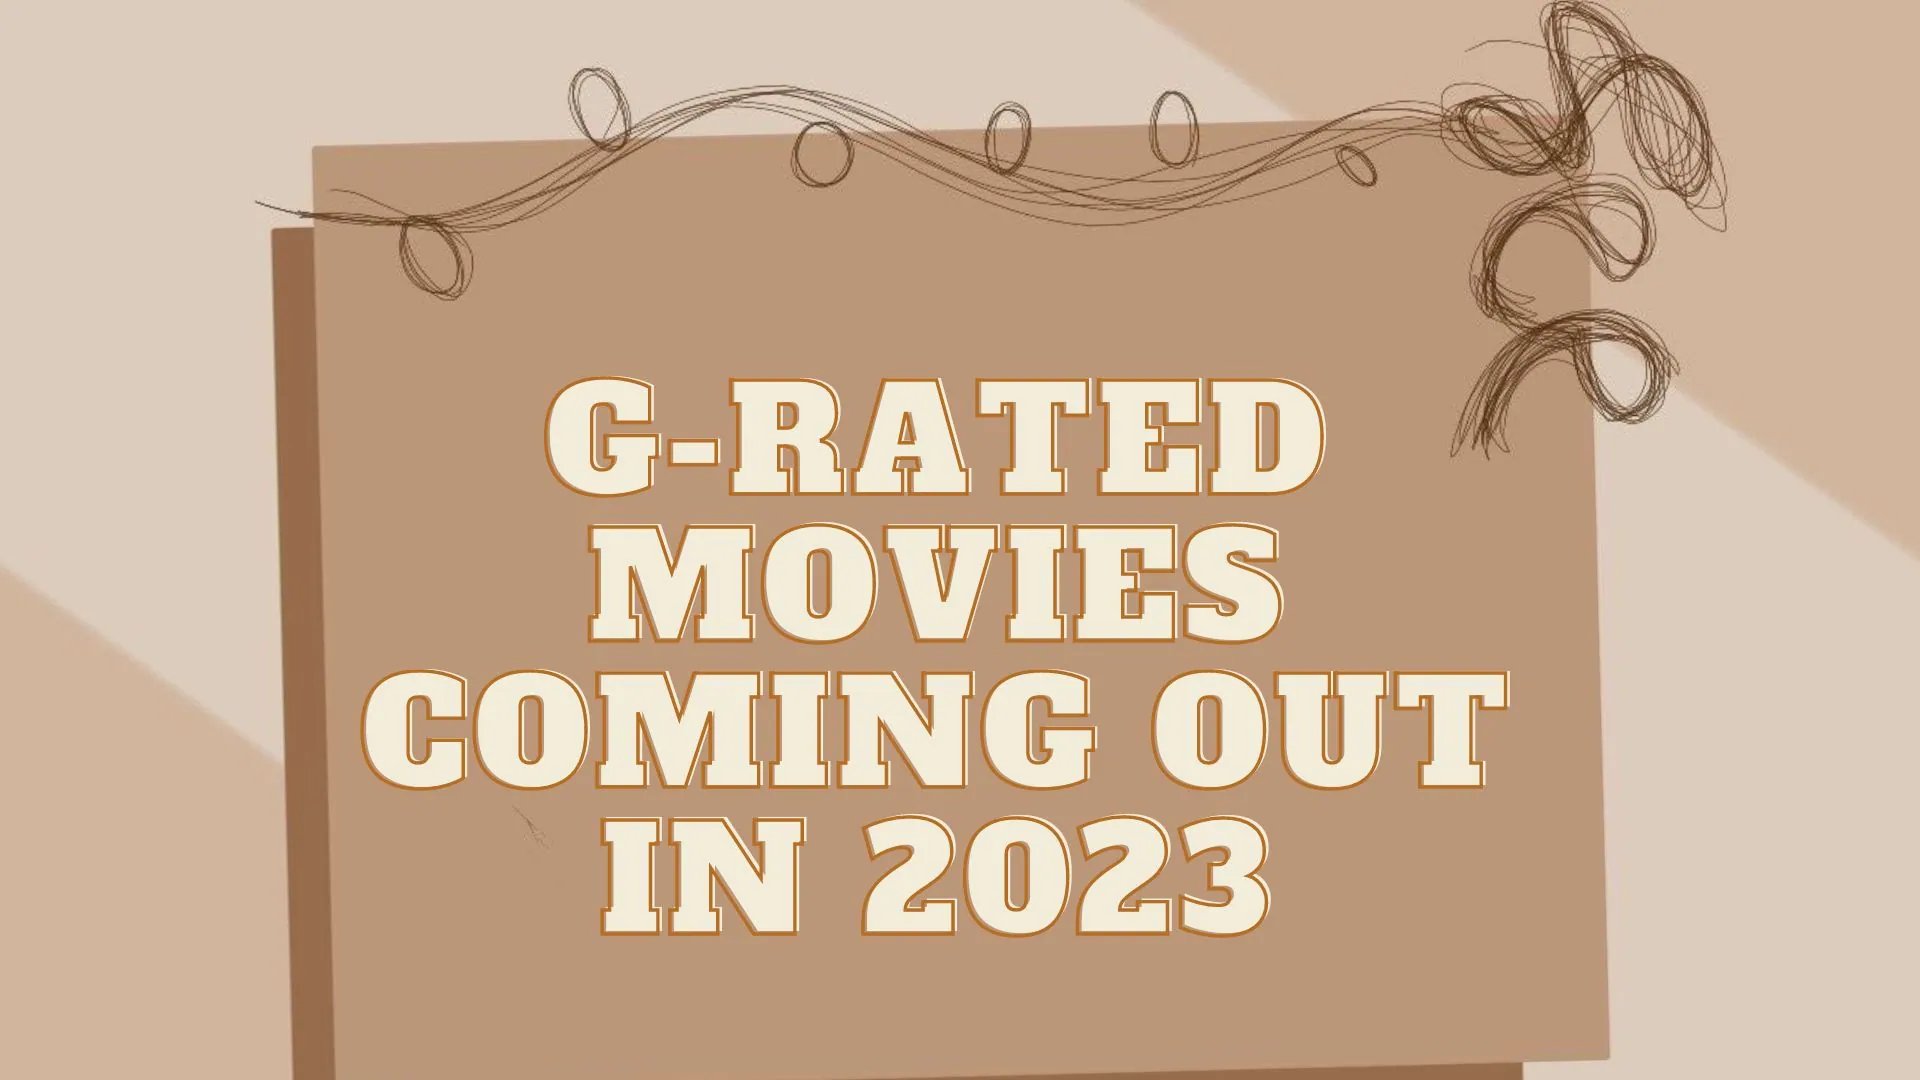 G-Rated Movies Coming Out In 2023